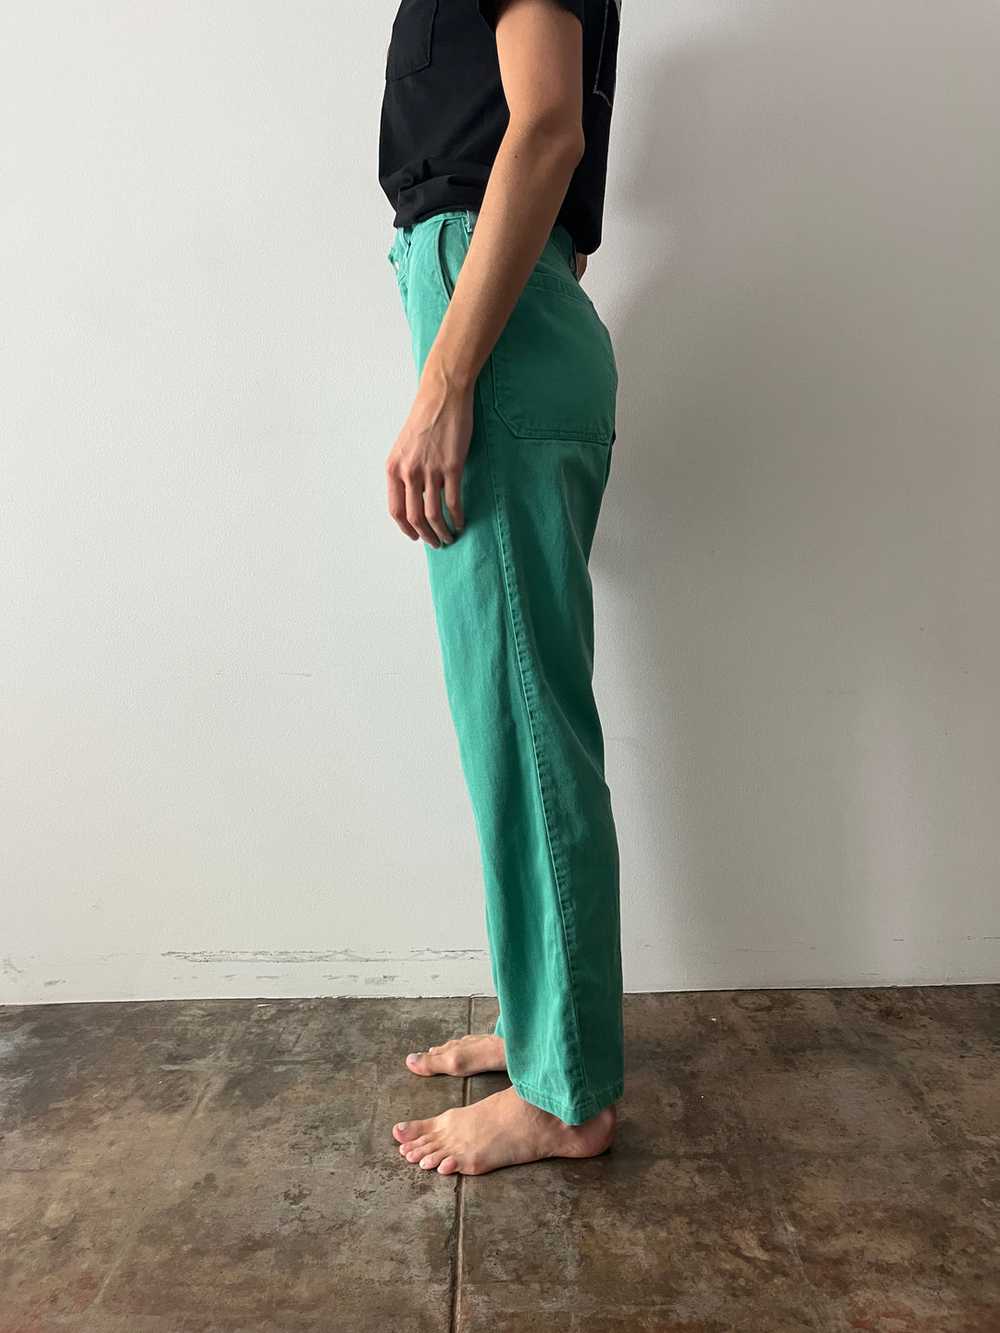 70s/80s Green Cotton Work Pants - image 3